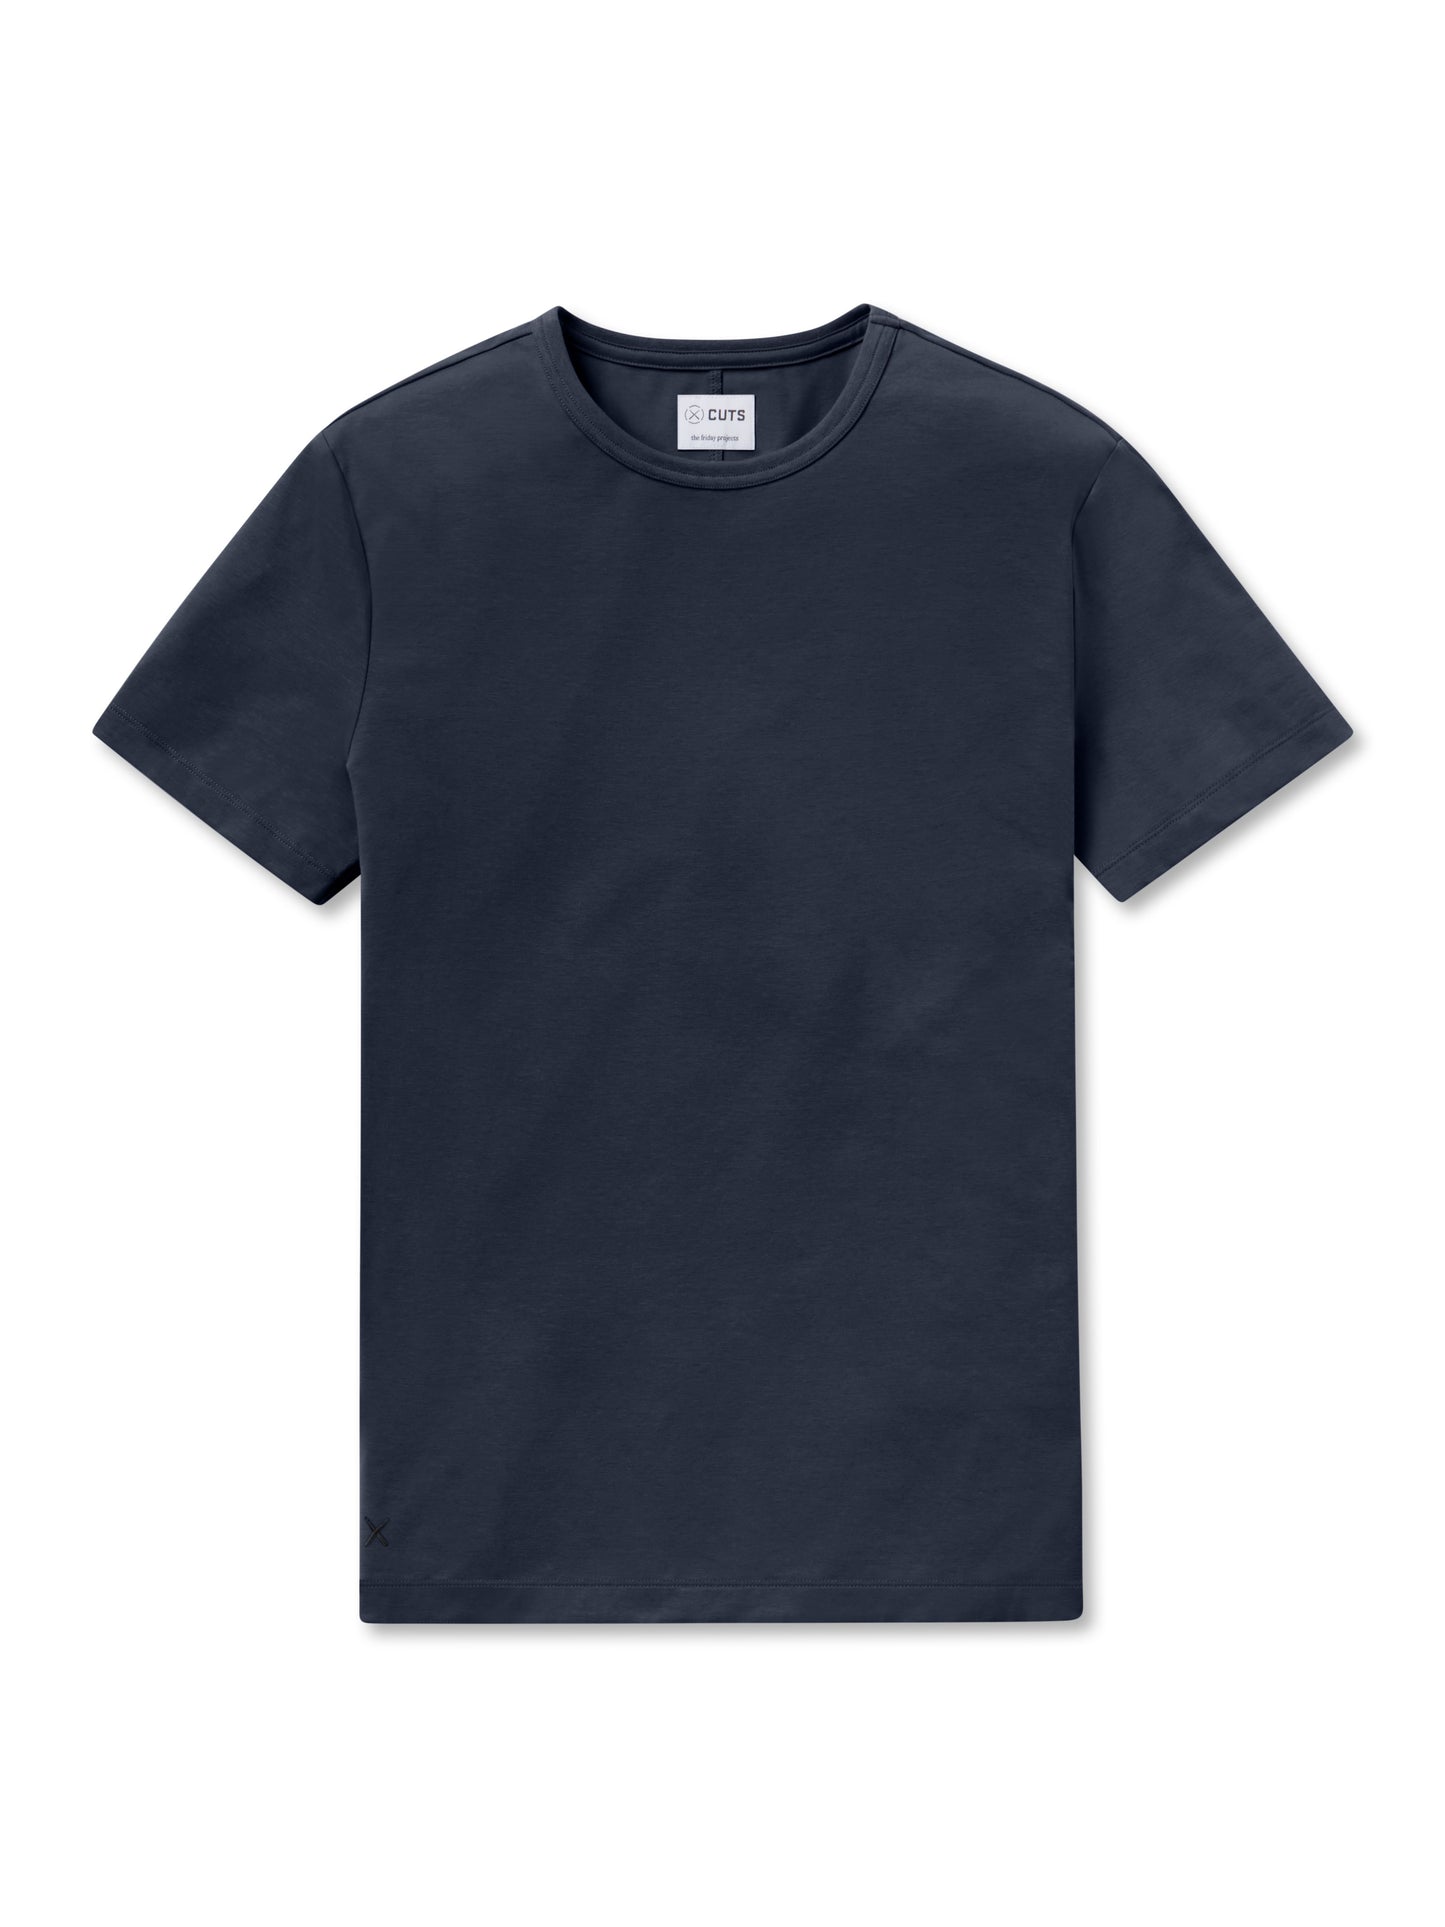 Cuts - Men - Pacific Blue AO Forever Tee